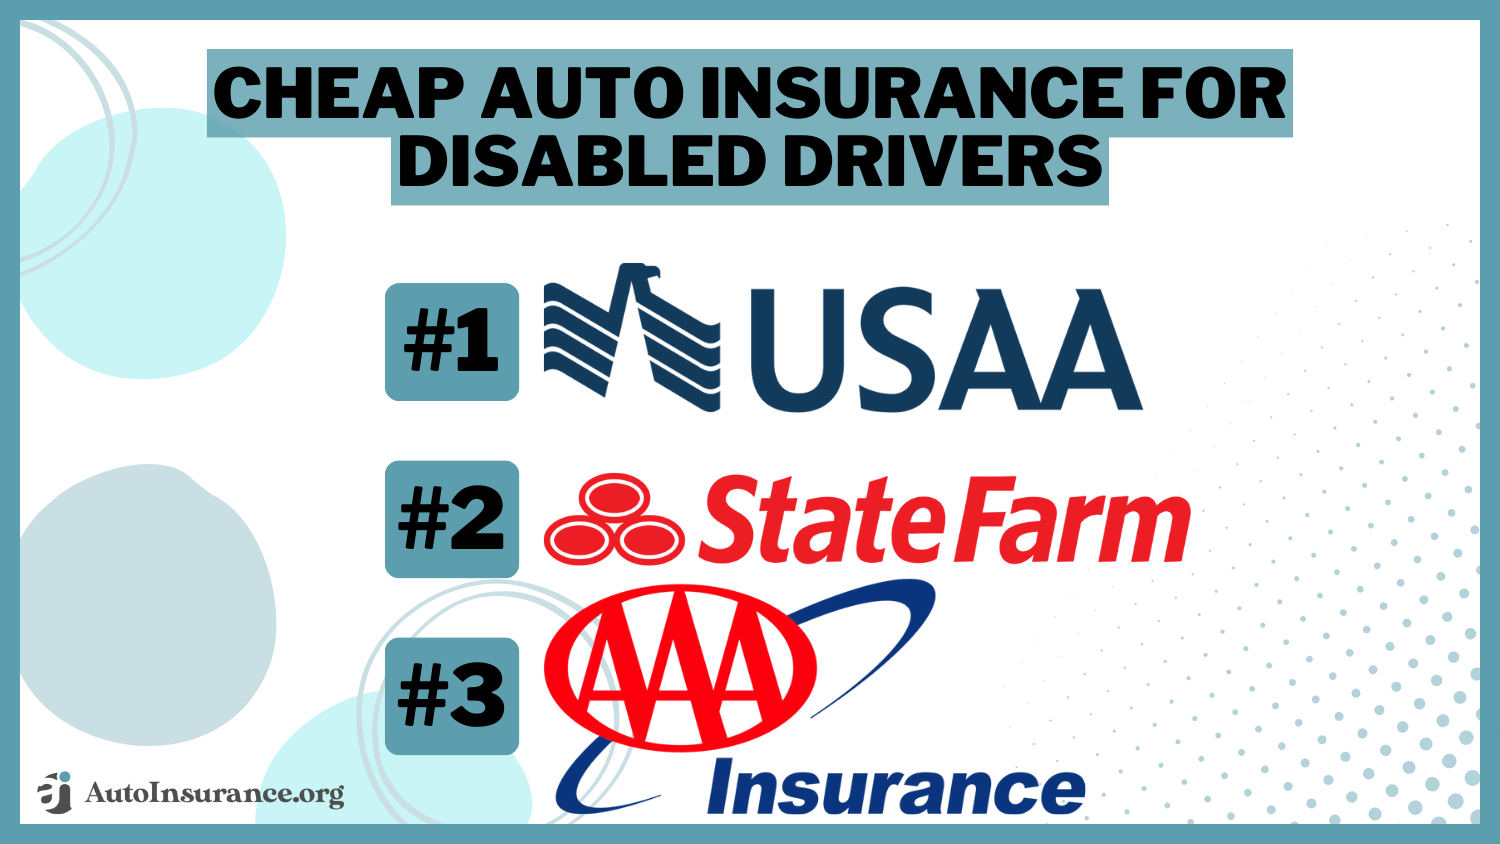 USAA State Farm AAA cheap auto insurance for disabled drivers